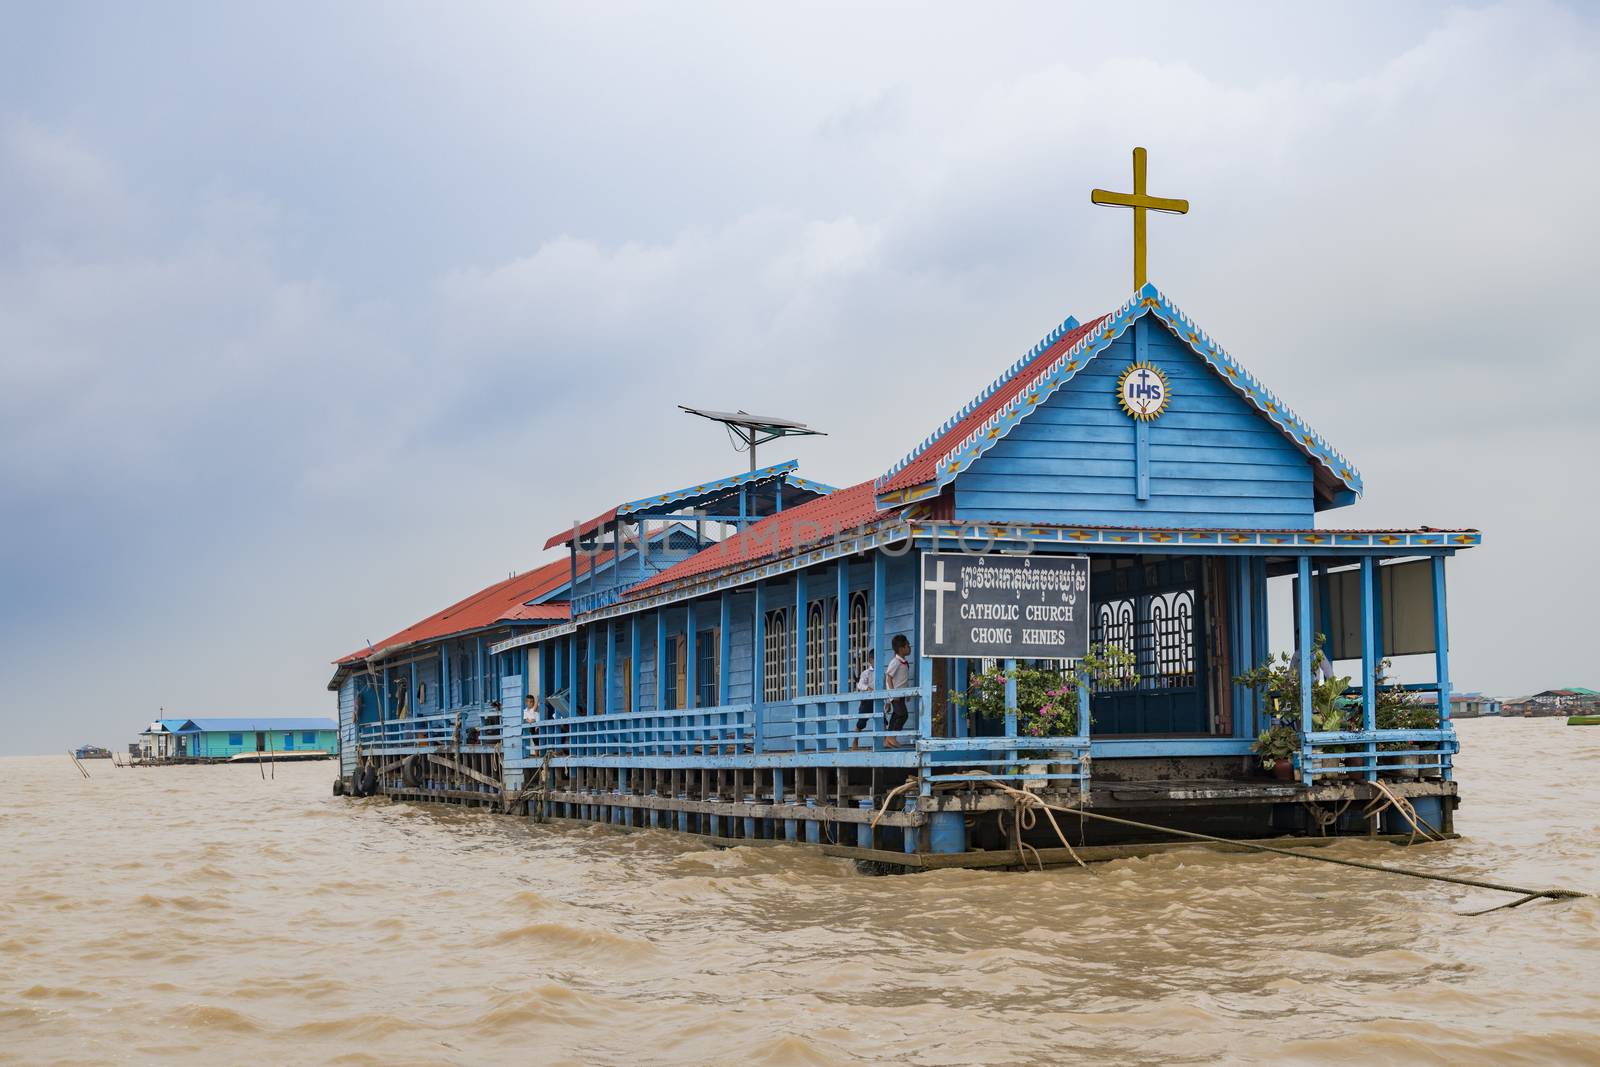 Chong Khneas (or Khnies) Catholic Church with both Khmer and Vietnamese school lying on the Tonle Sap lake, Siem Reap Province, Cambodia